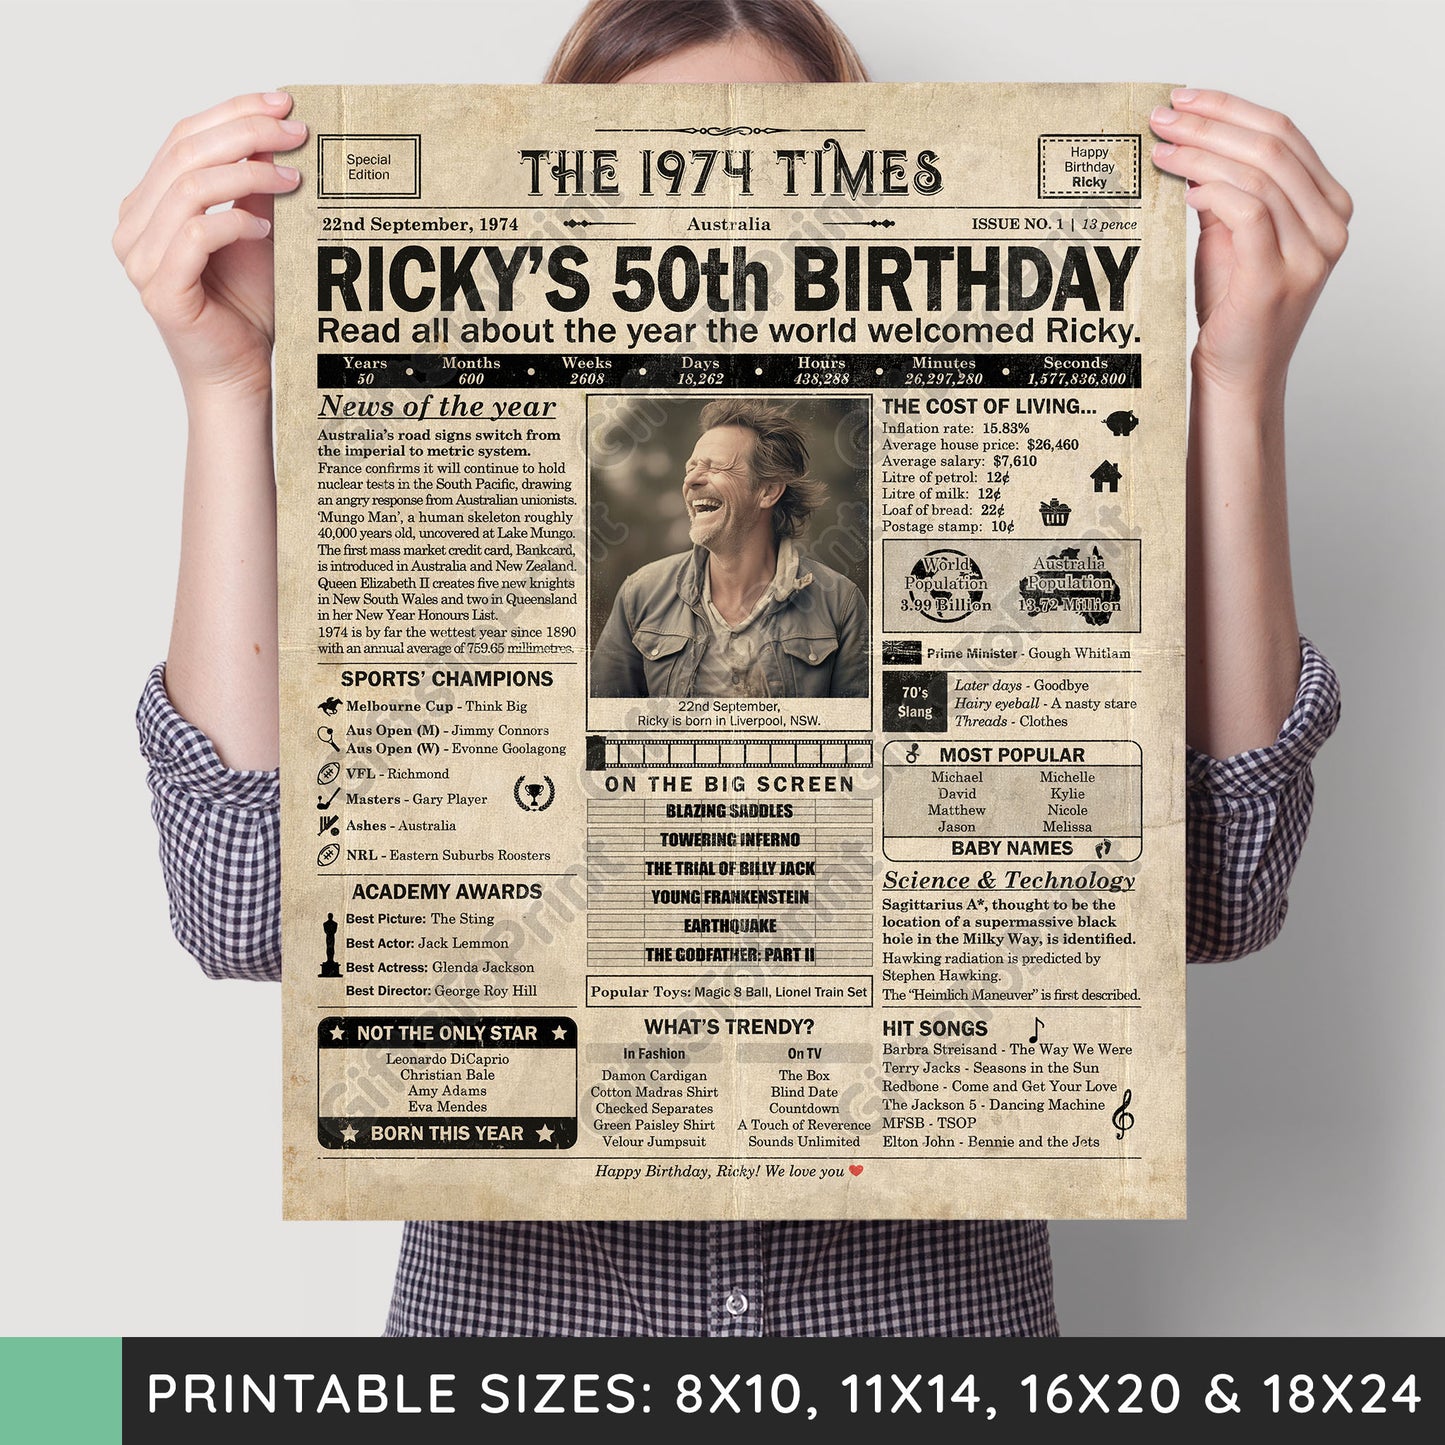 Personalised 50th Birthday Gift: A Printable AUSTRALIAN Birthday Poster of 1974